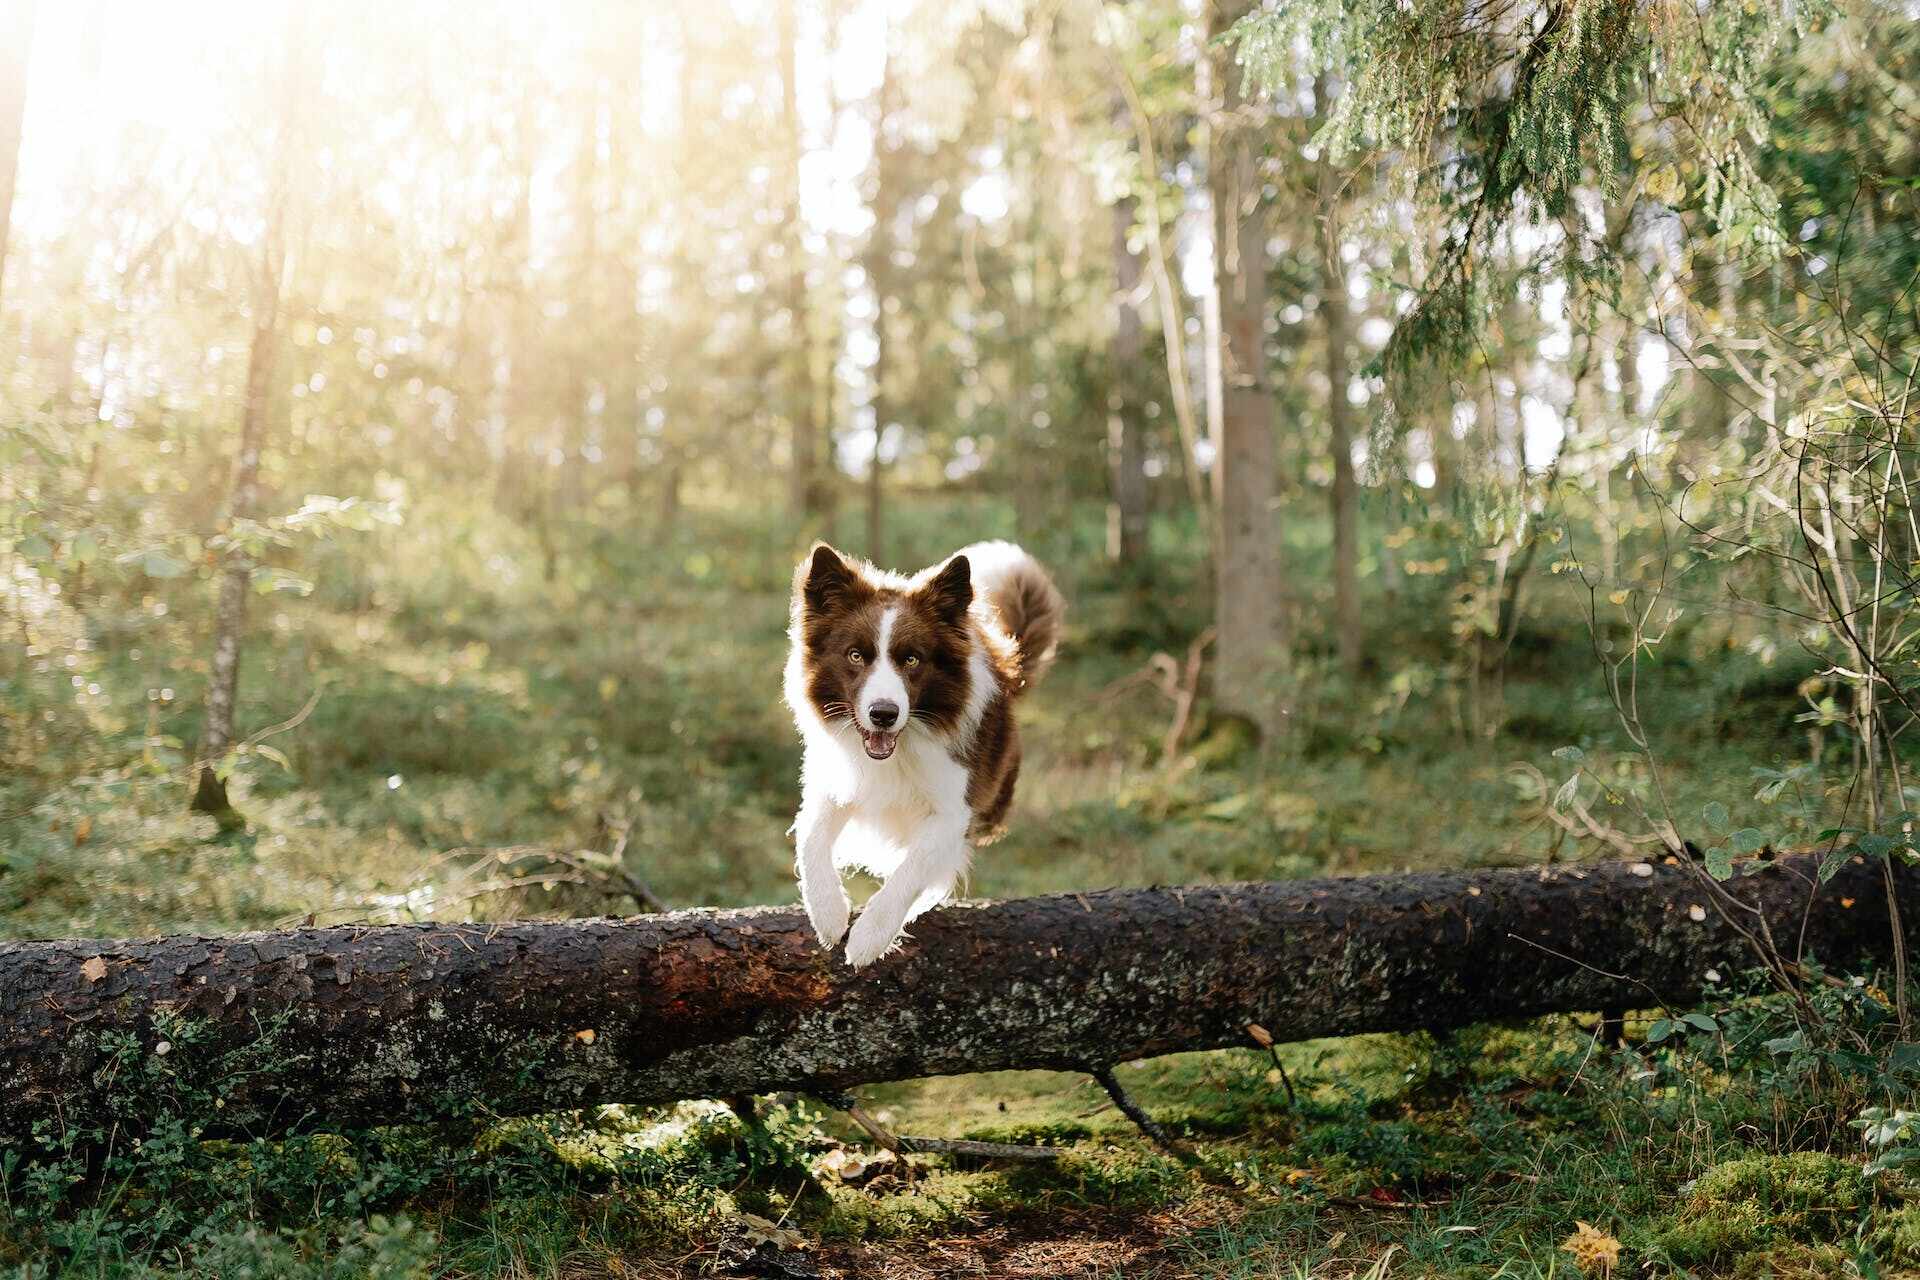 A dog running away into a forested area